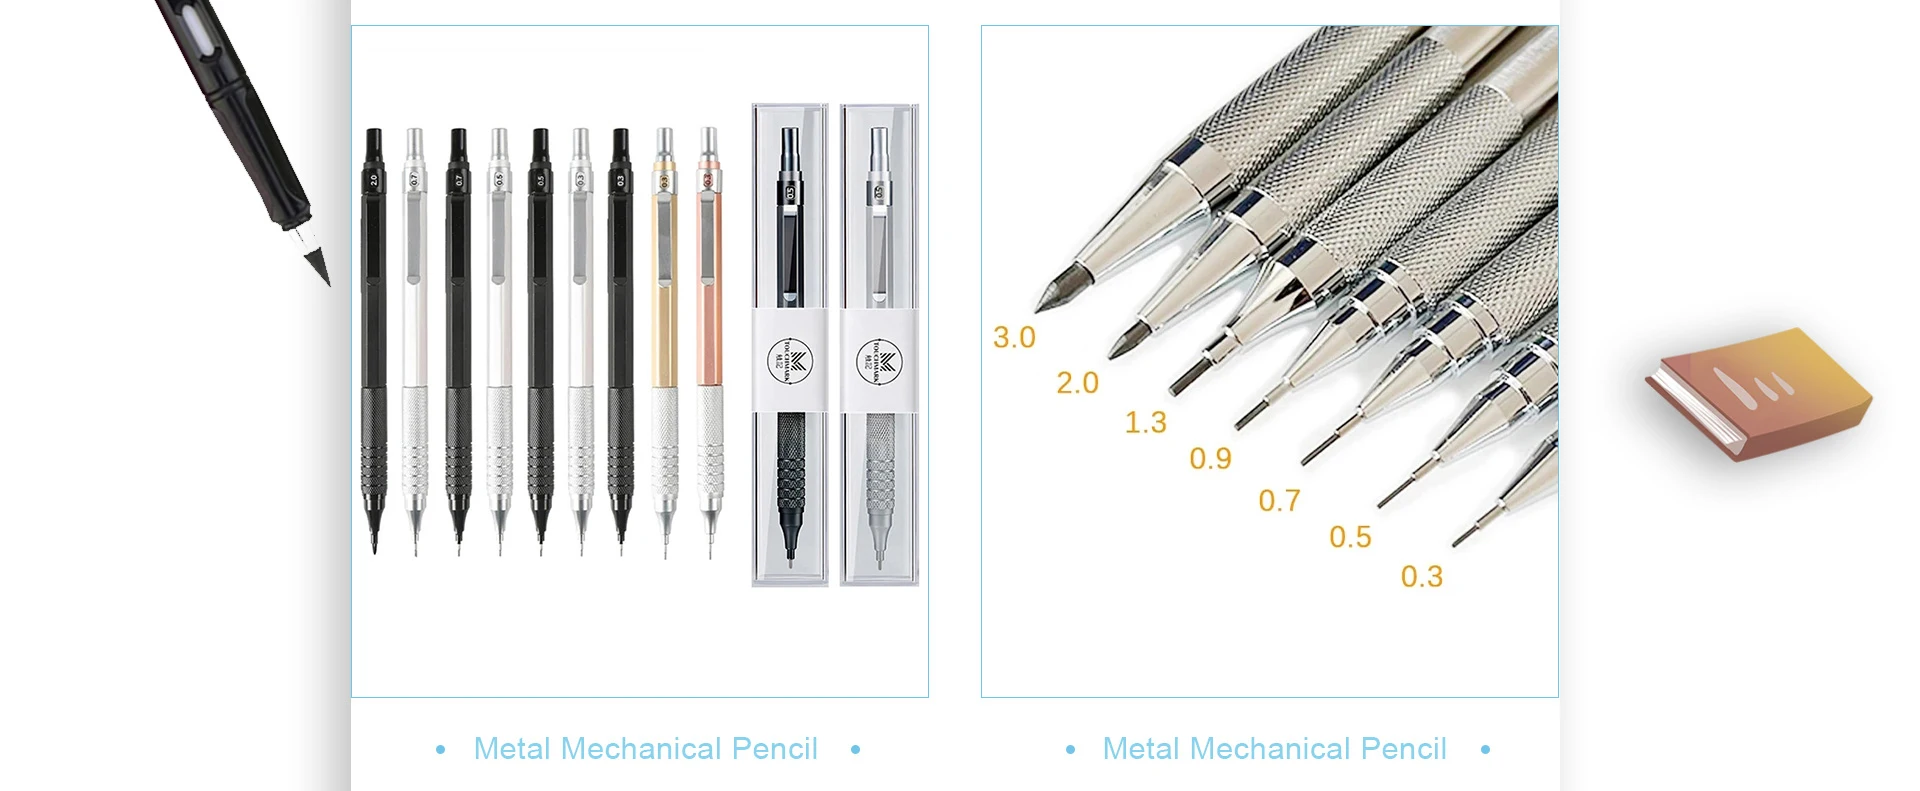 Dropship 0.3/0.5/0.7/0.9/1.3/2.0mm Mechanical Pencil Set Full Metal Art  Drawing Painting Automatic Pencil With Leads,Office School Supply to Sell  Online at a Lower Price